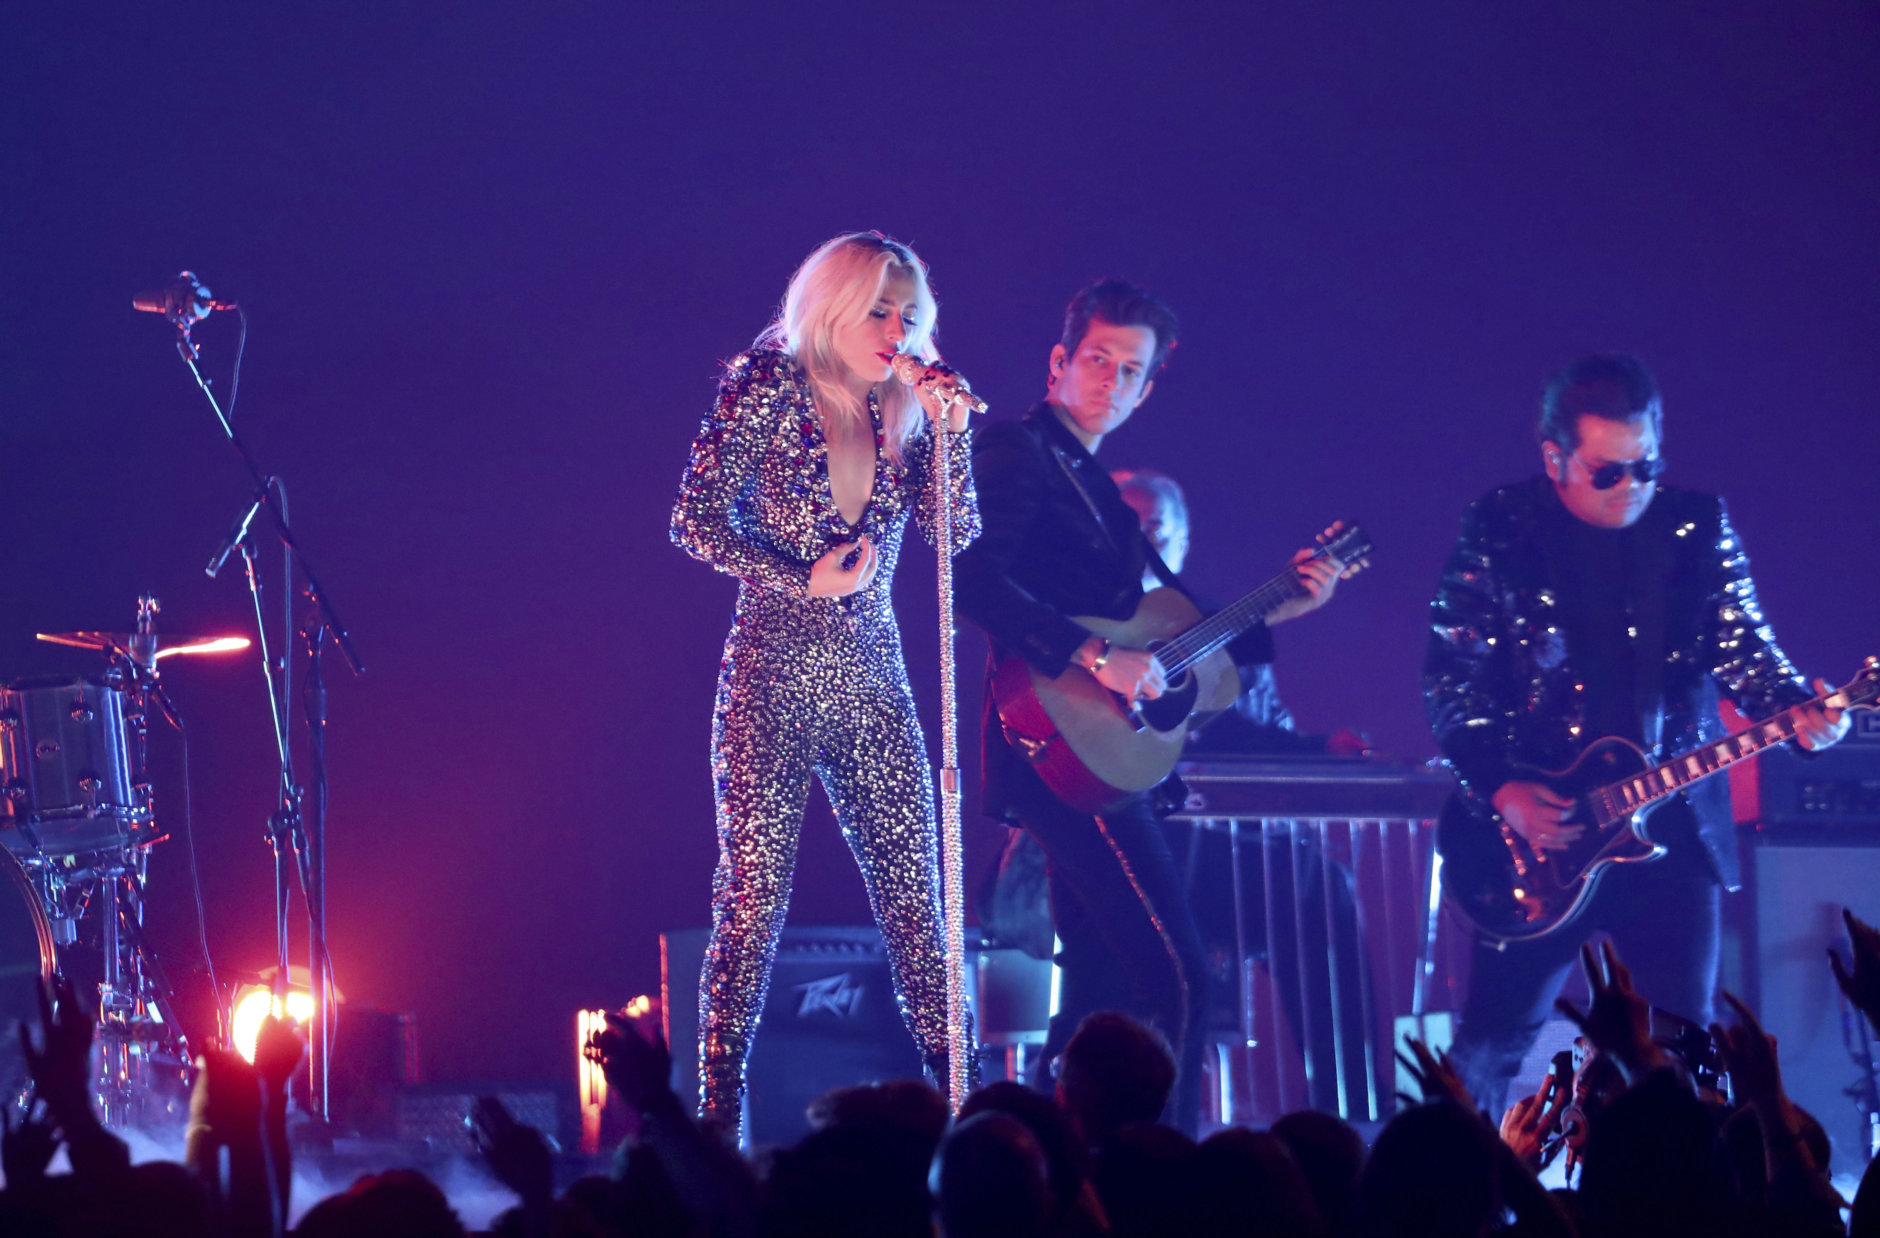 Lady Gaga, left, and Mark Ronson perform "Shallow" at the 61st annual Grammy Awards on Sunday, Feb. 10, 2019, in Los Angeles. (Photo by Matt Sayles/Invision/AP)